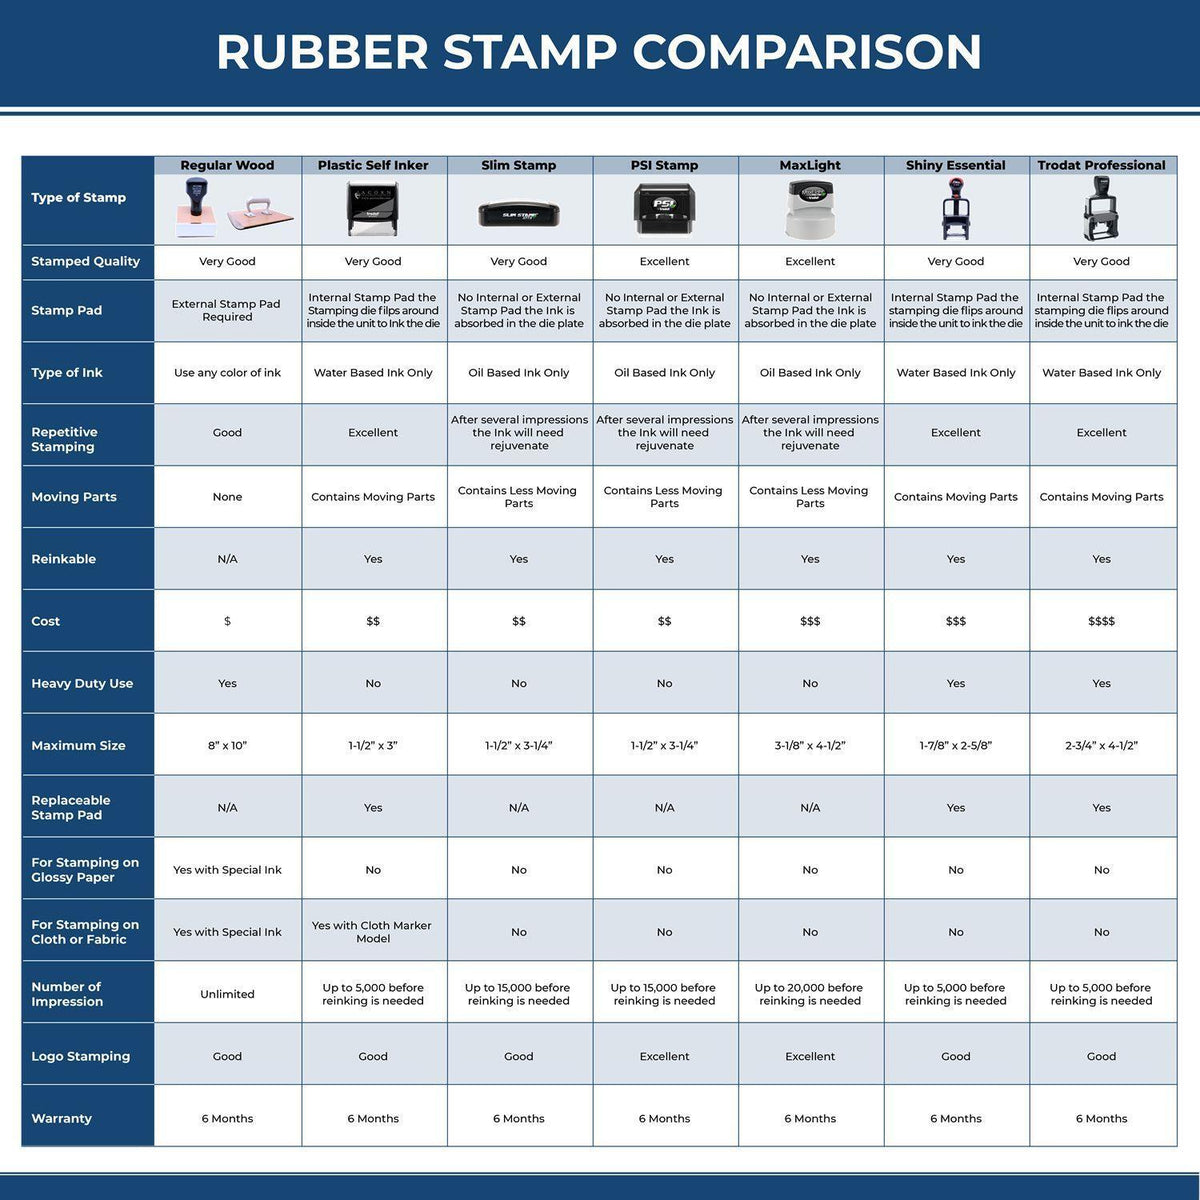 Large Box Closed No Order Rubber Stamp 4882R Rubber Stamp Comparison